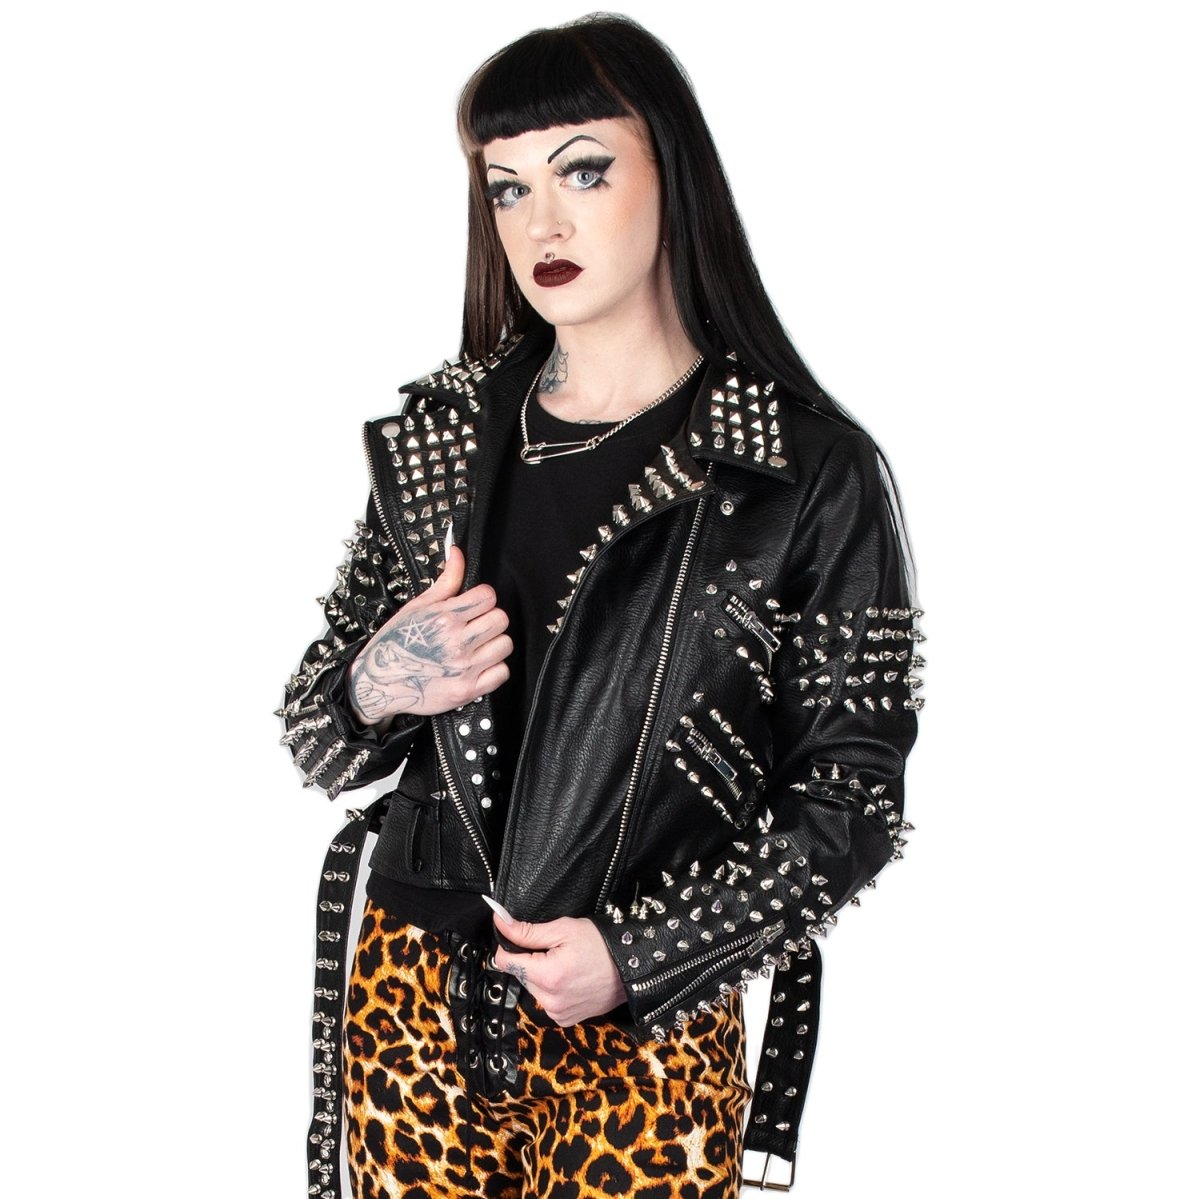 Orchid Bloom | Heavy Metal Studded Leather Jacket